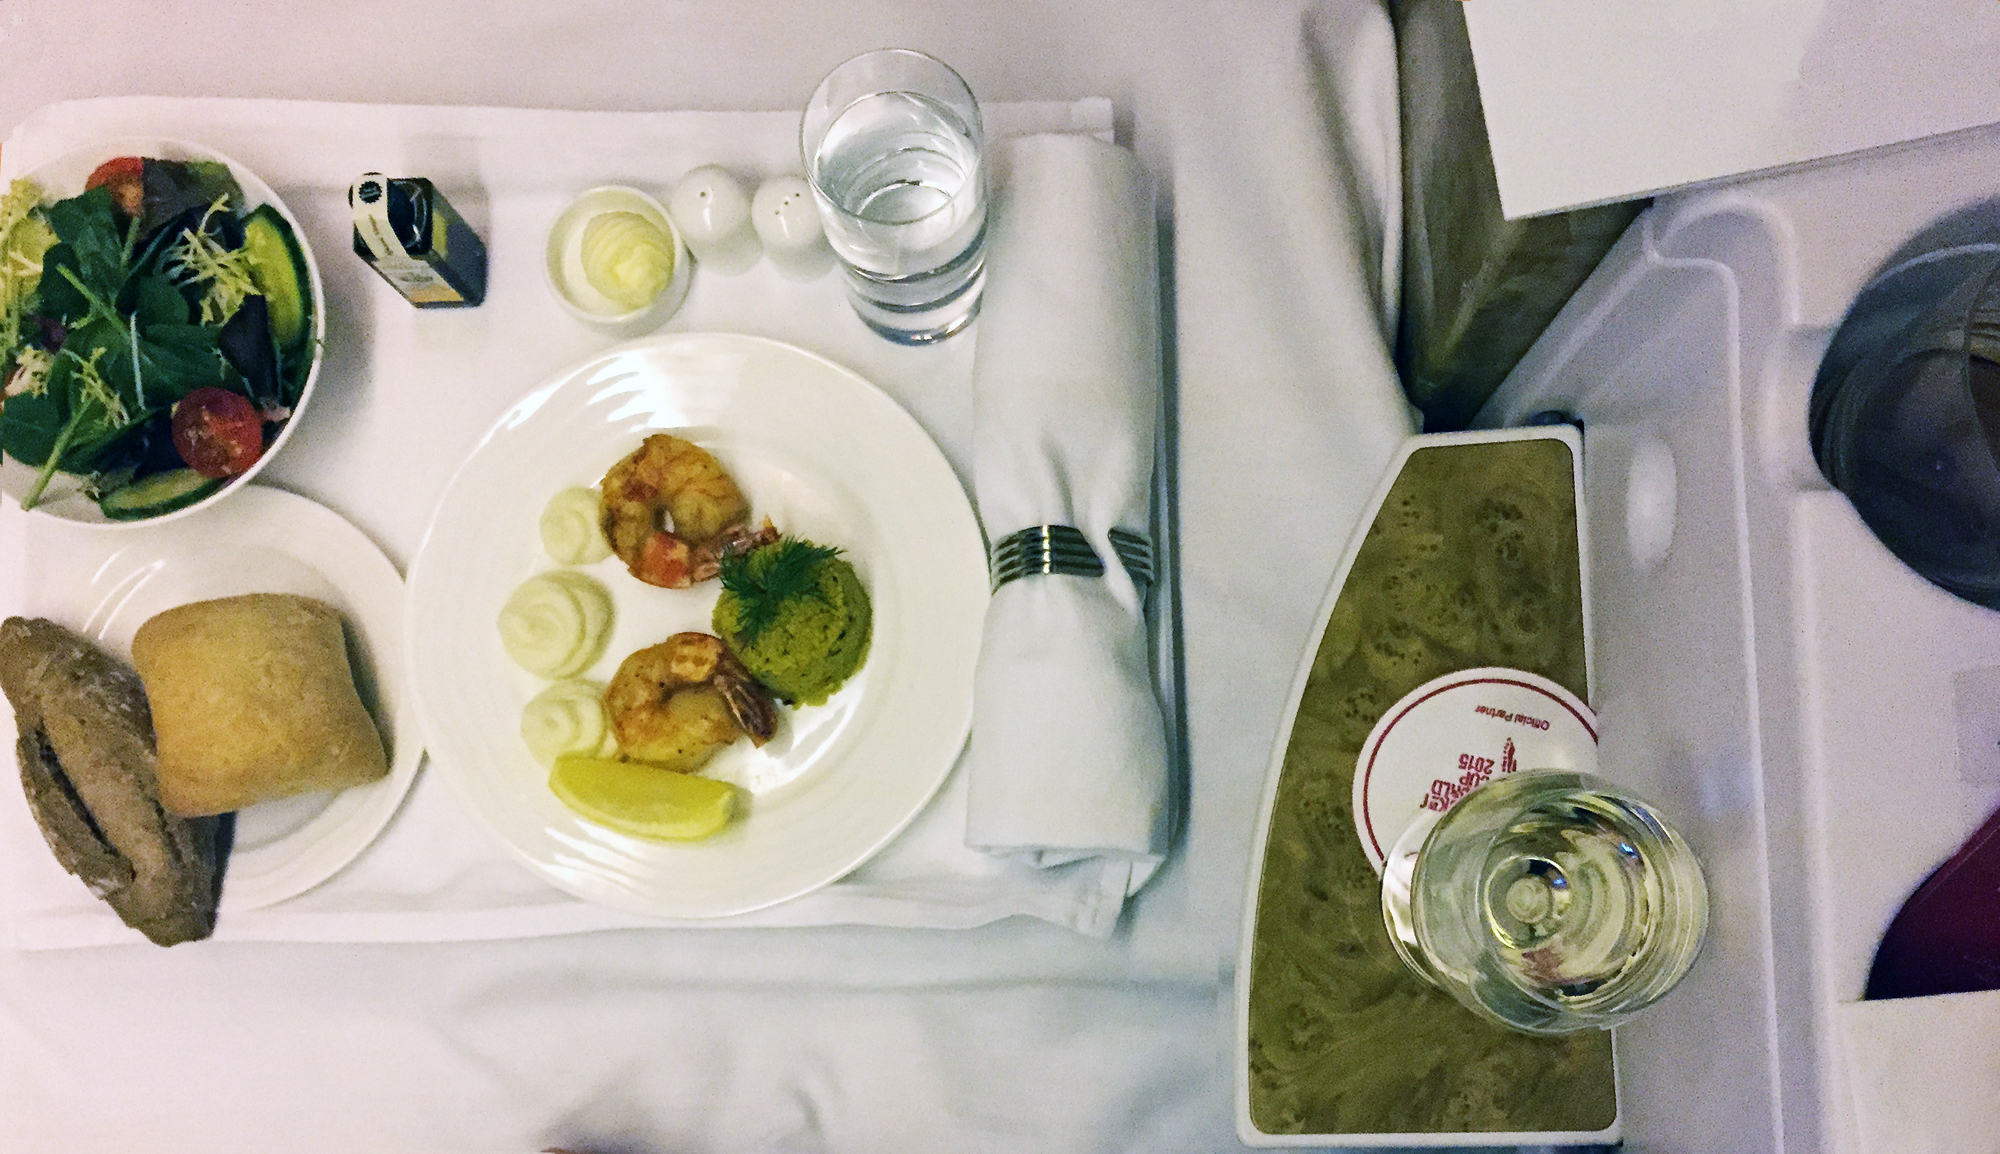 bussines class dinner on emirates